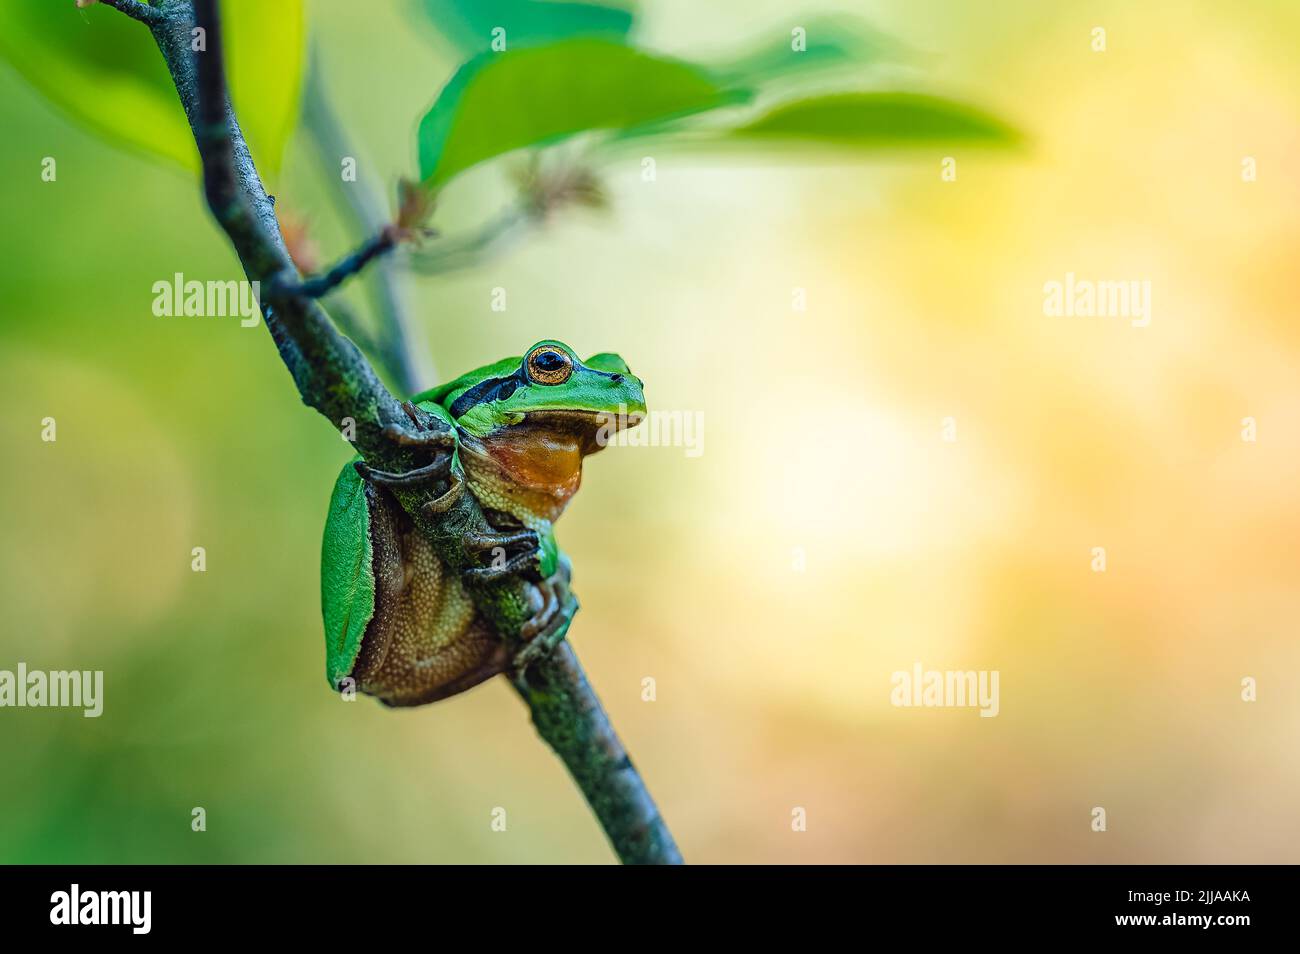 The European tree frog (Hyla arborea) sitting on a tree branch. Blurred colorful background. Stock Photo